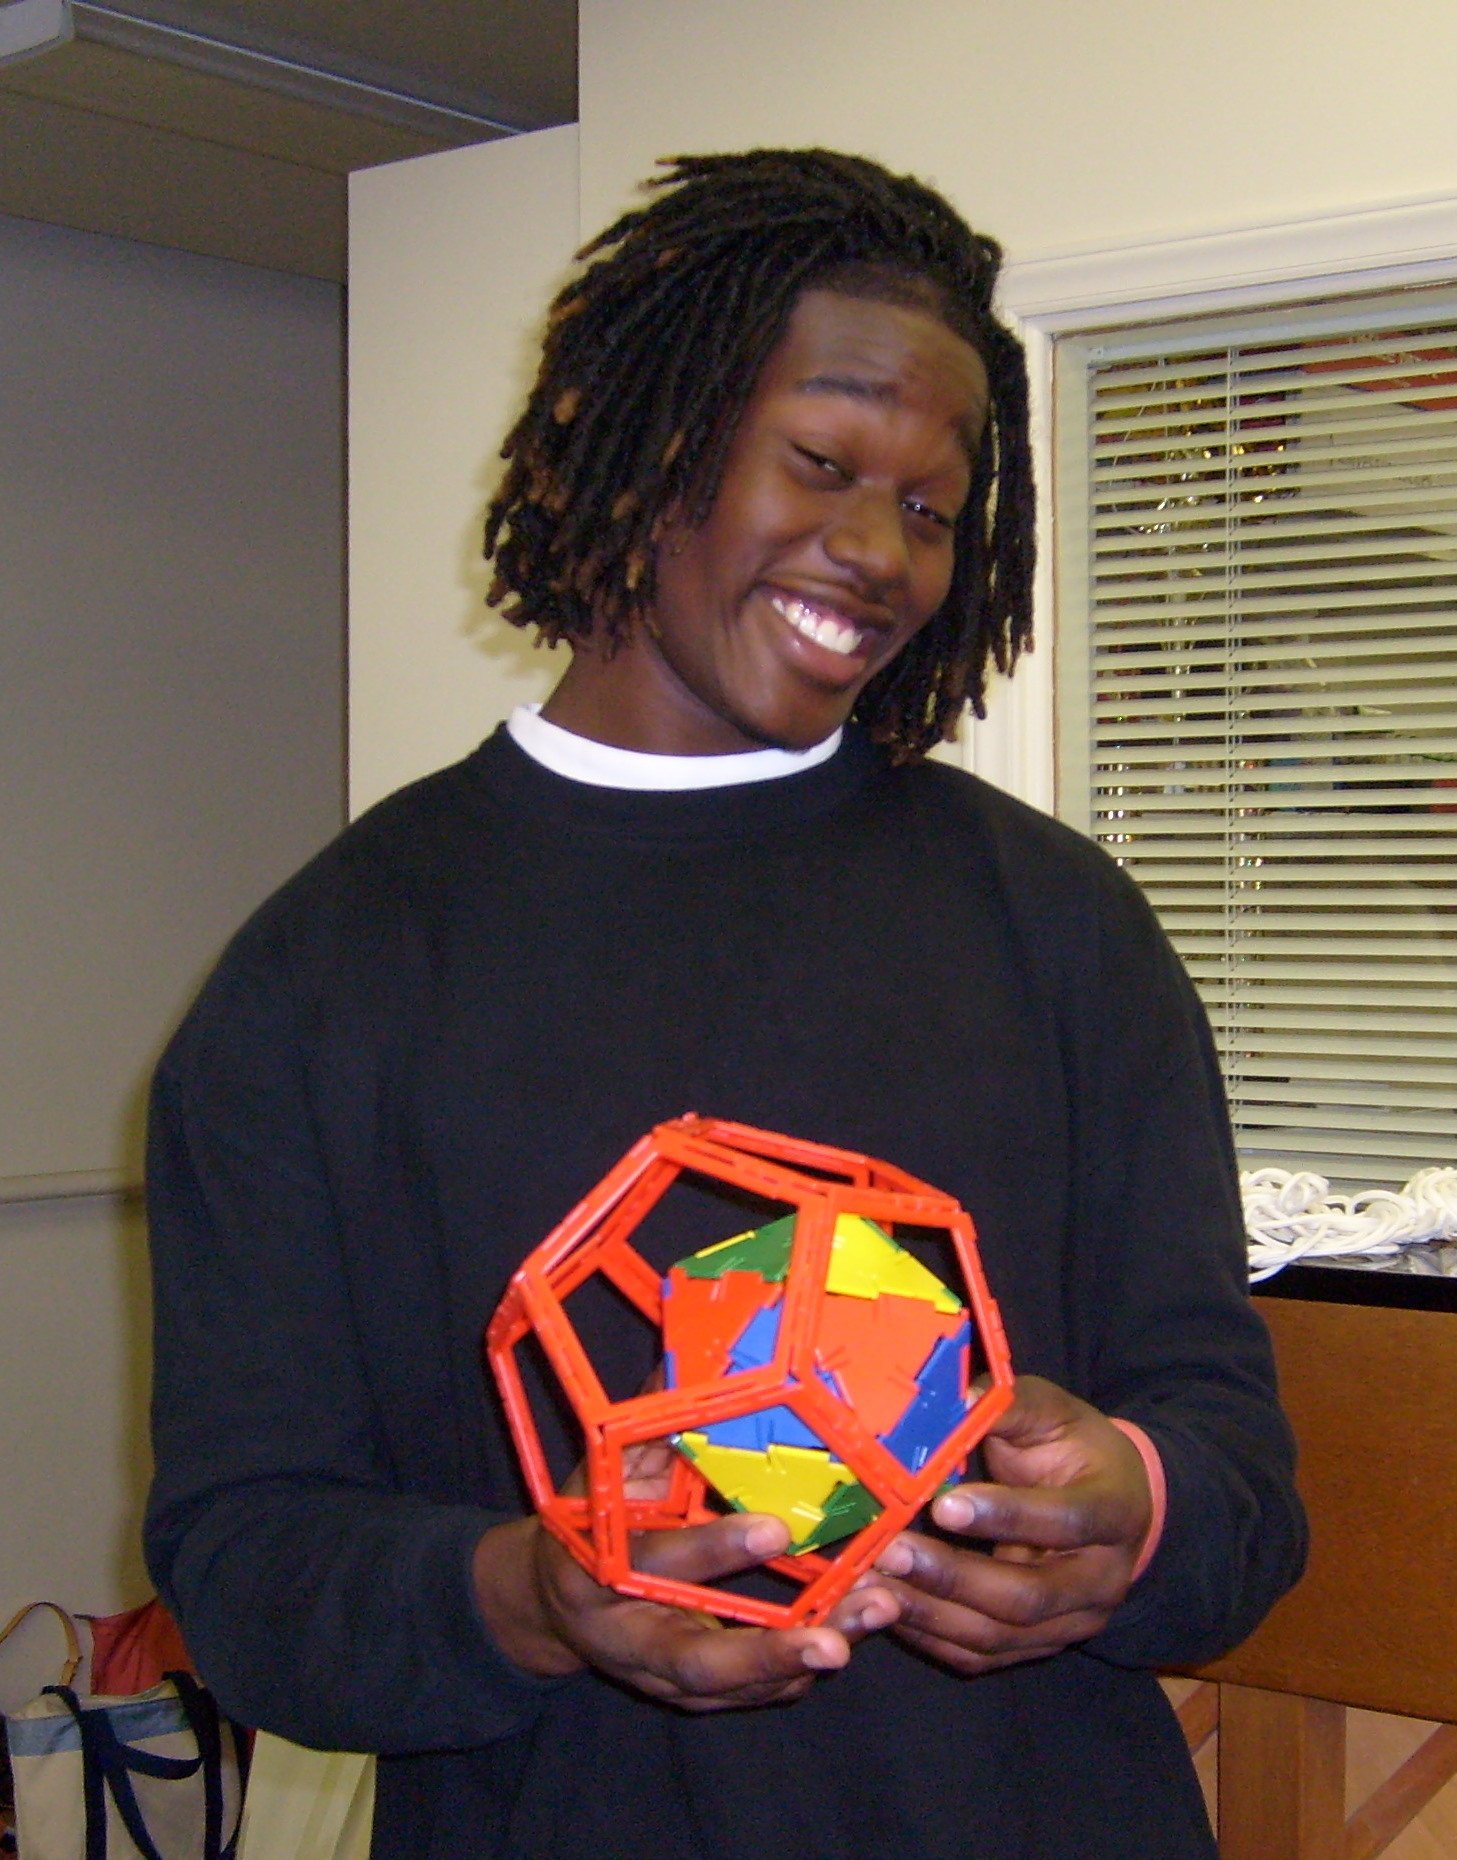 A student with a dodecahedron model